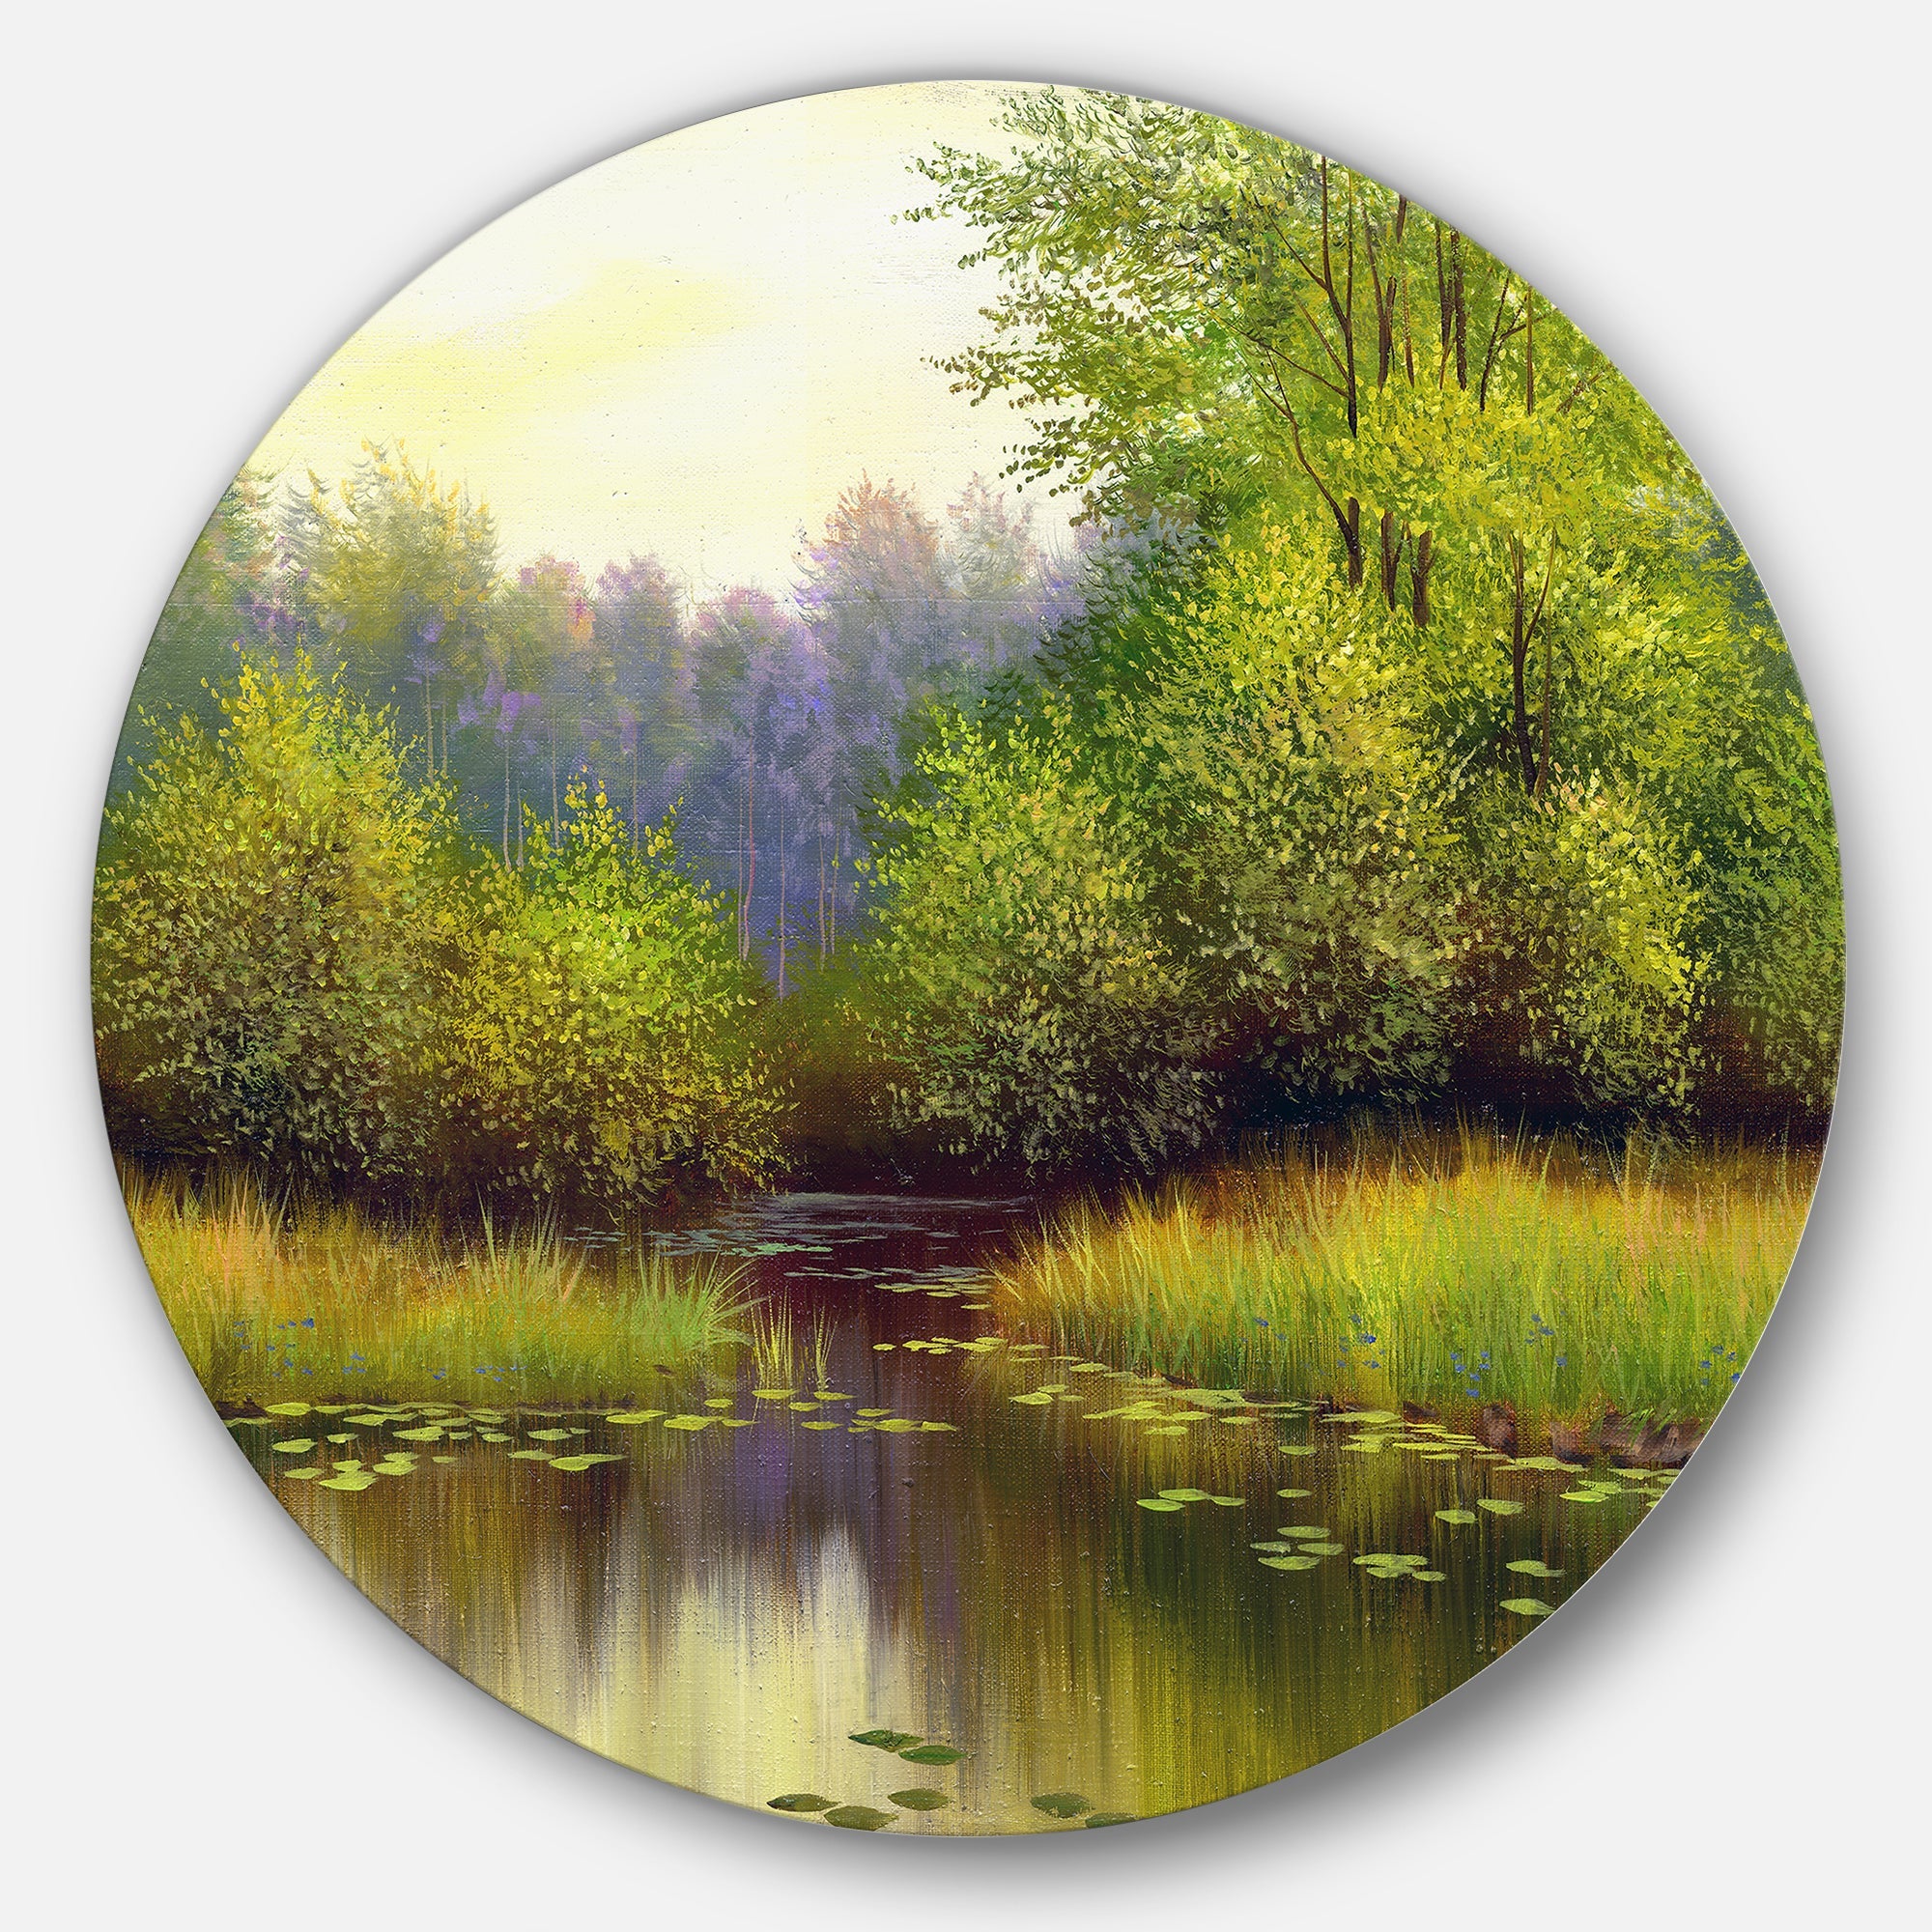 Green Summer with River Landscape Circle Metal Wall Art